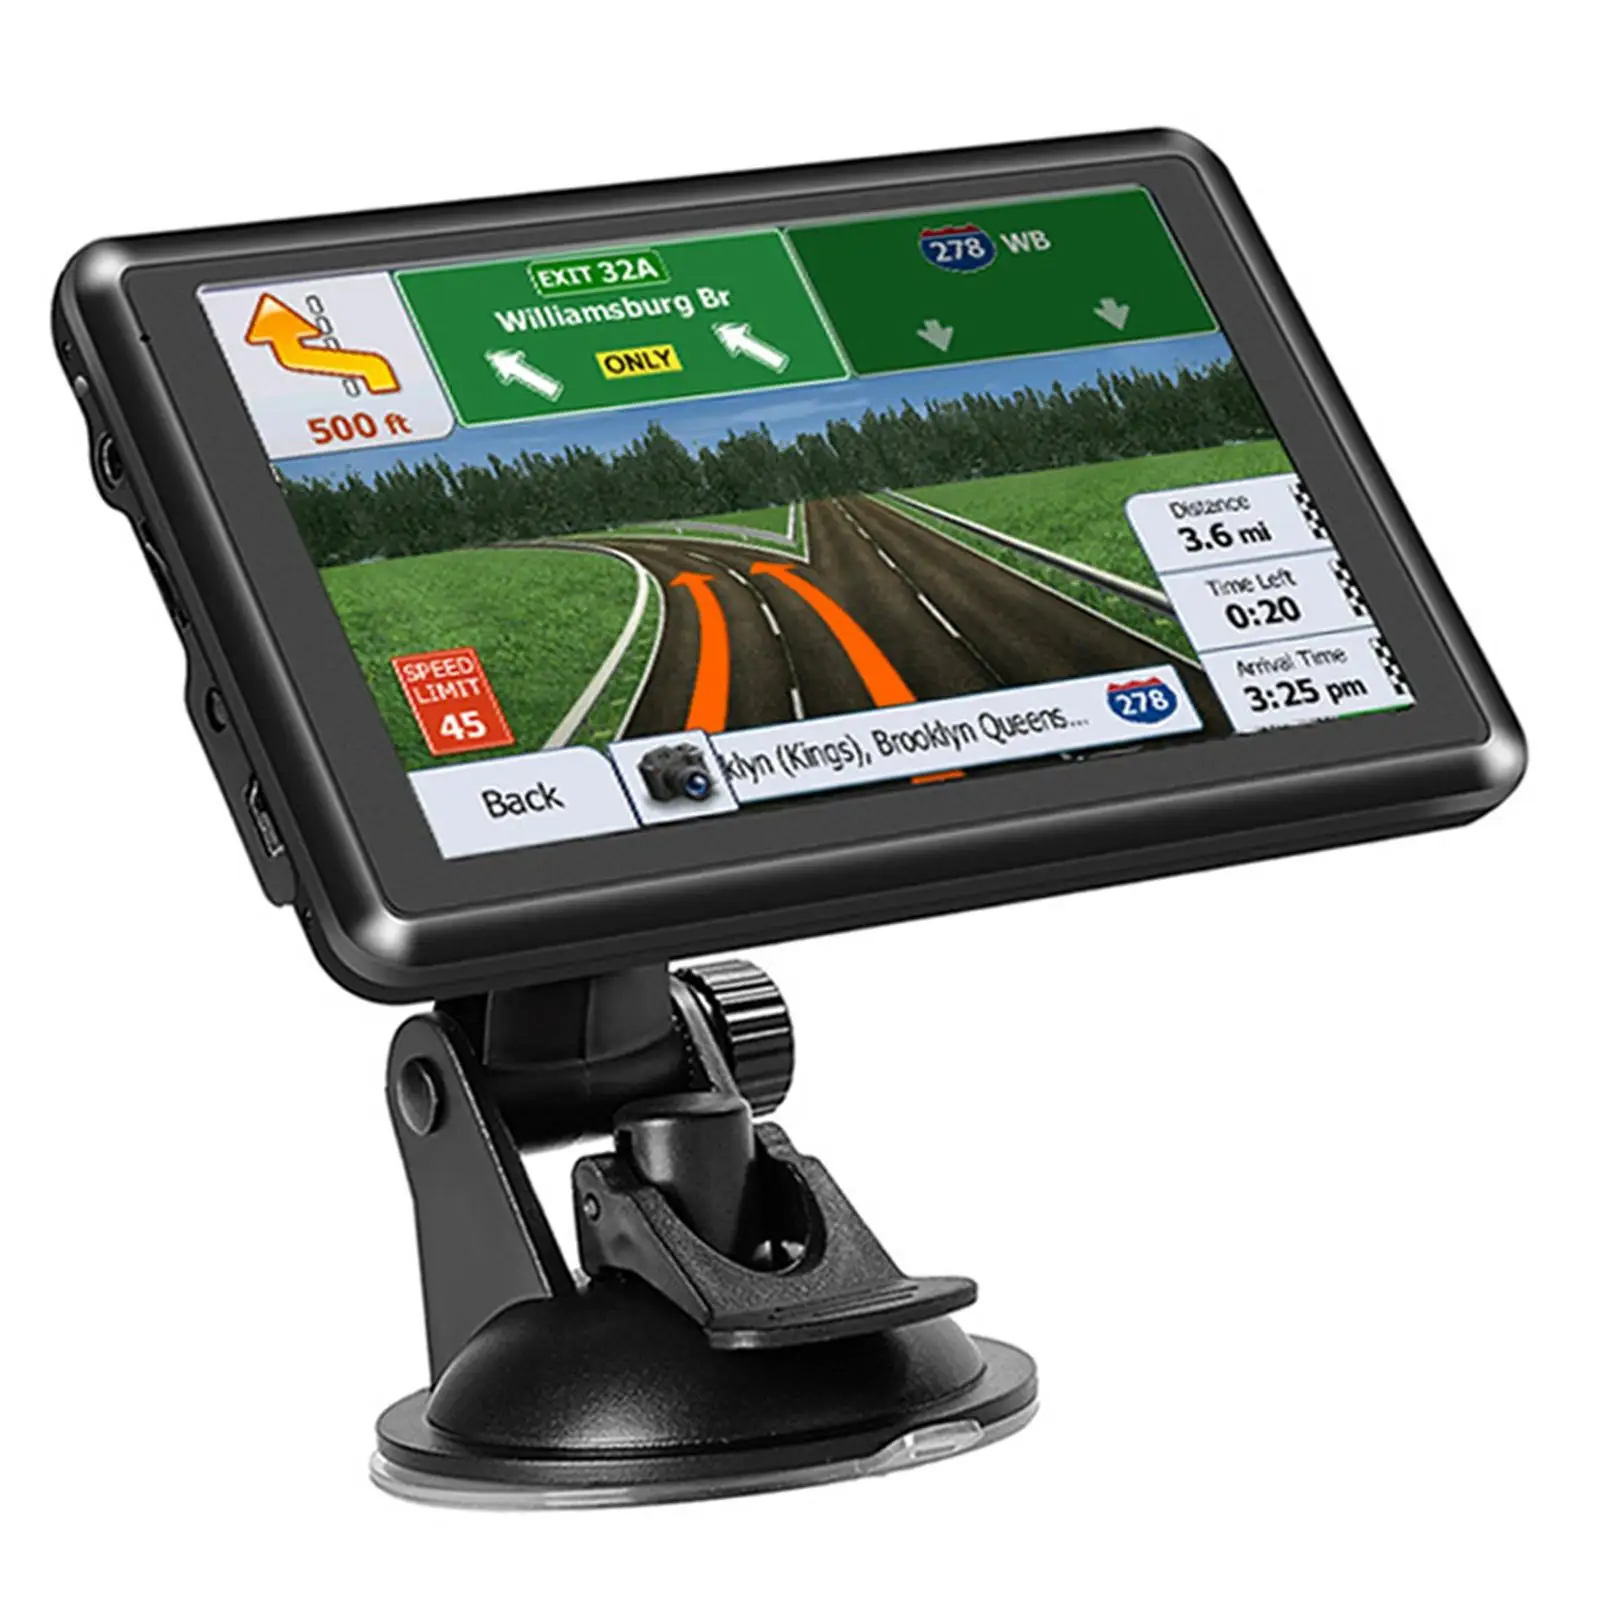 

Multifunctional Truck GPS Navigation System 5 inch Touchscreen 8GB 128 MB GPS Device